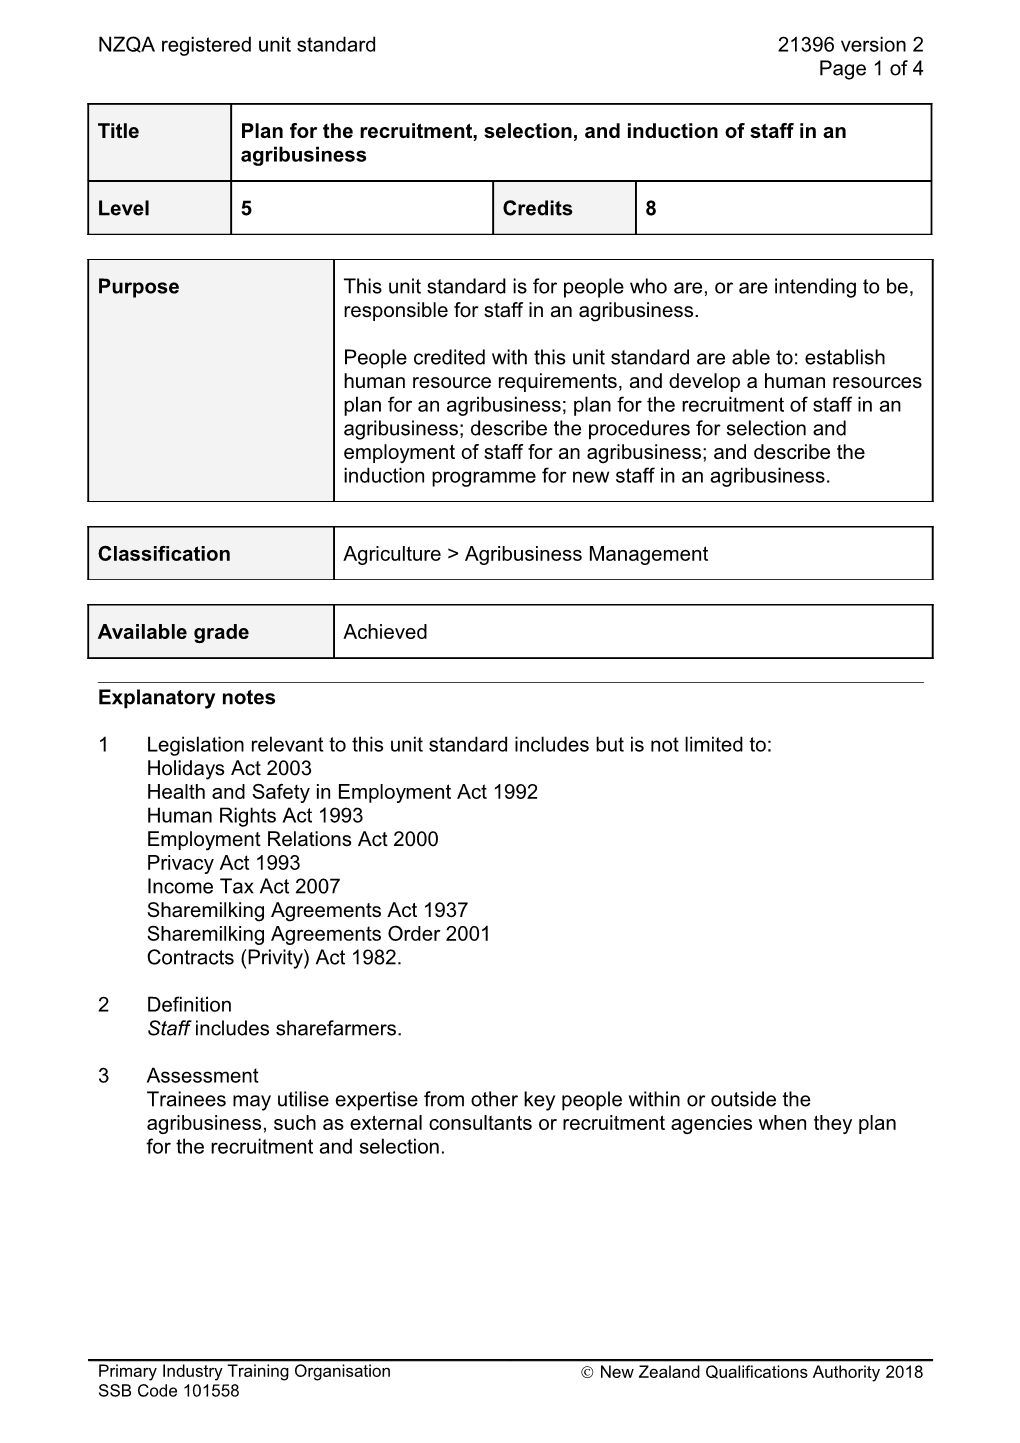 21396 Plan for the Recruitment, Selection, and Induction of Staff in an Agribusiness